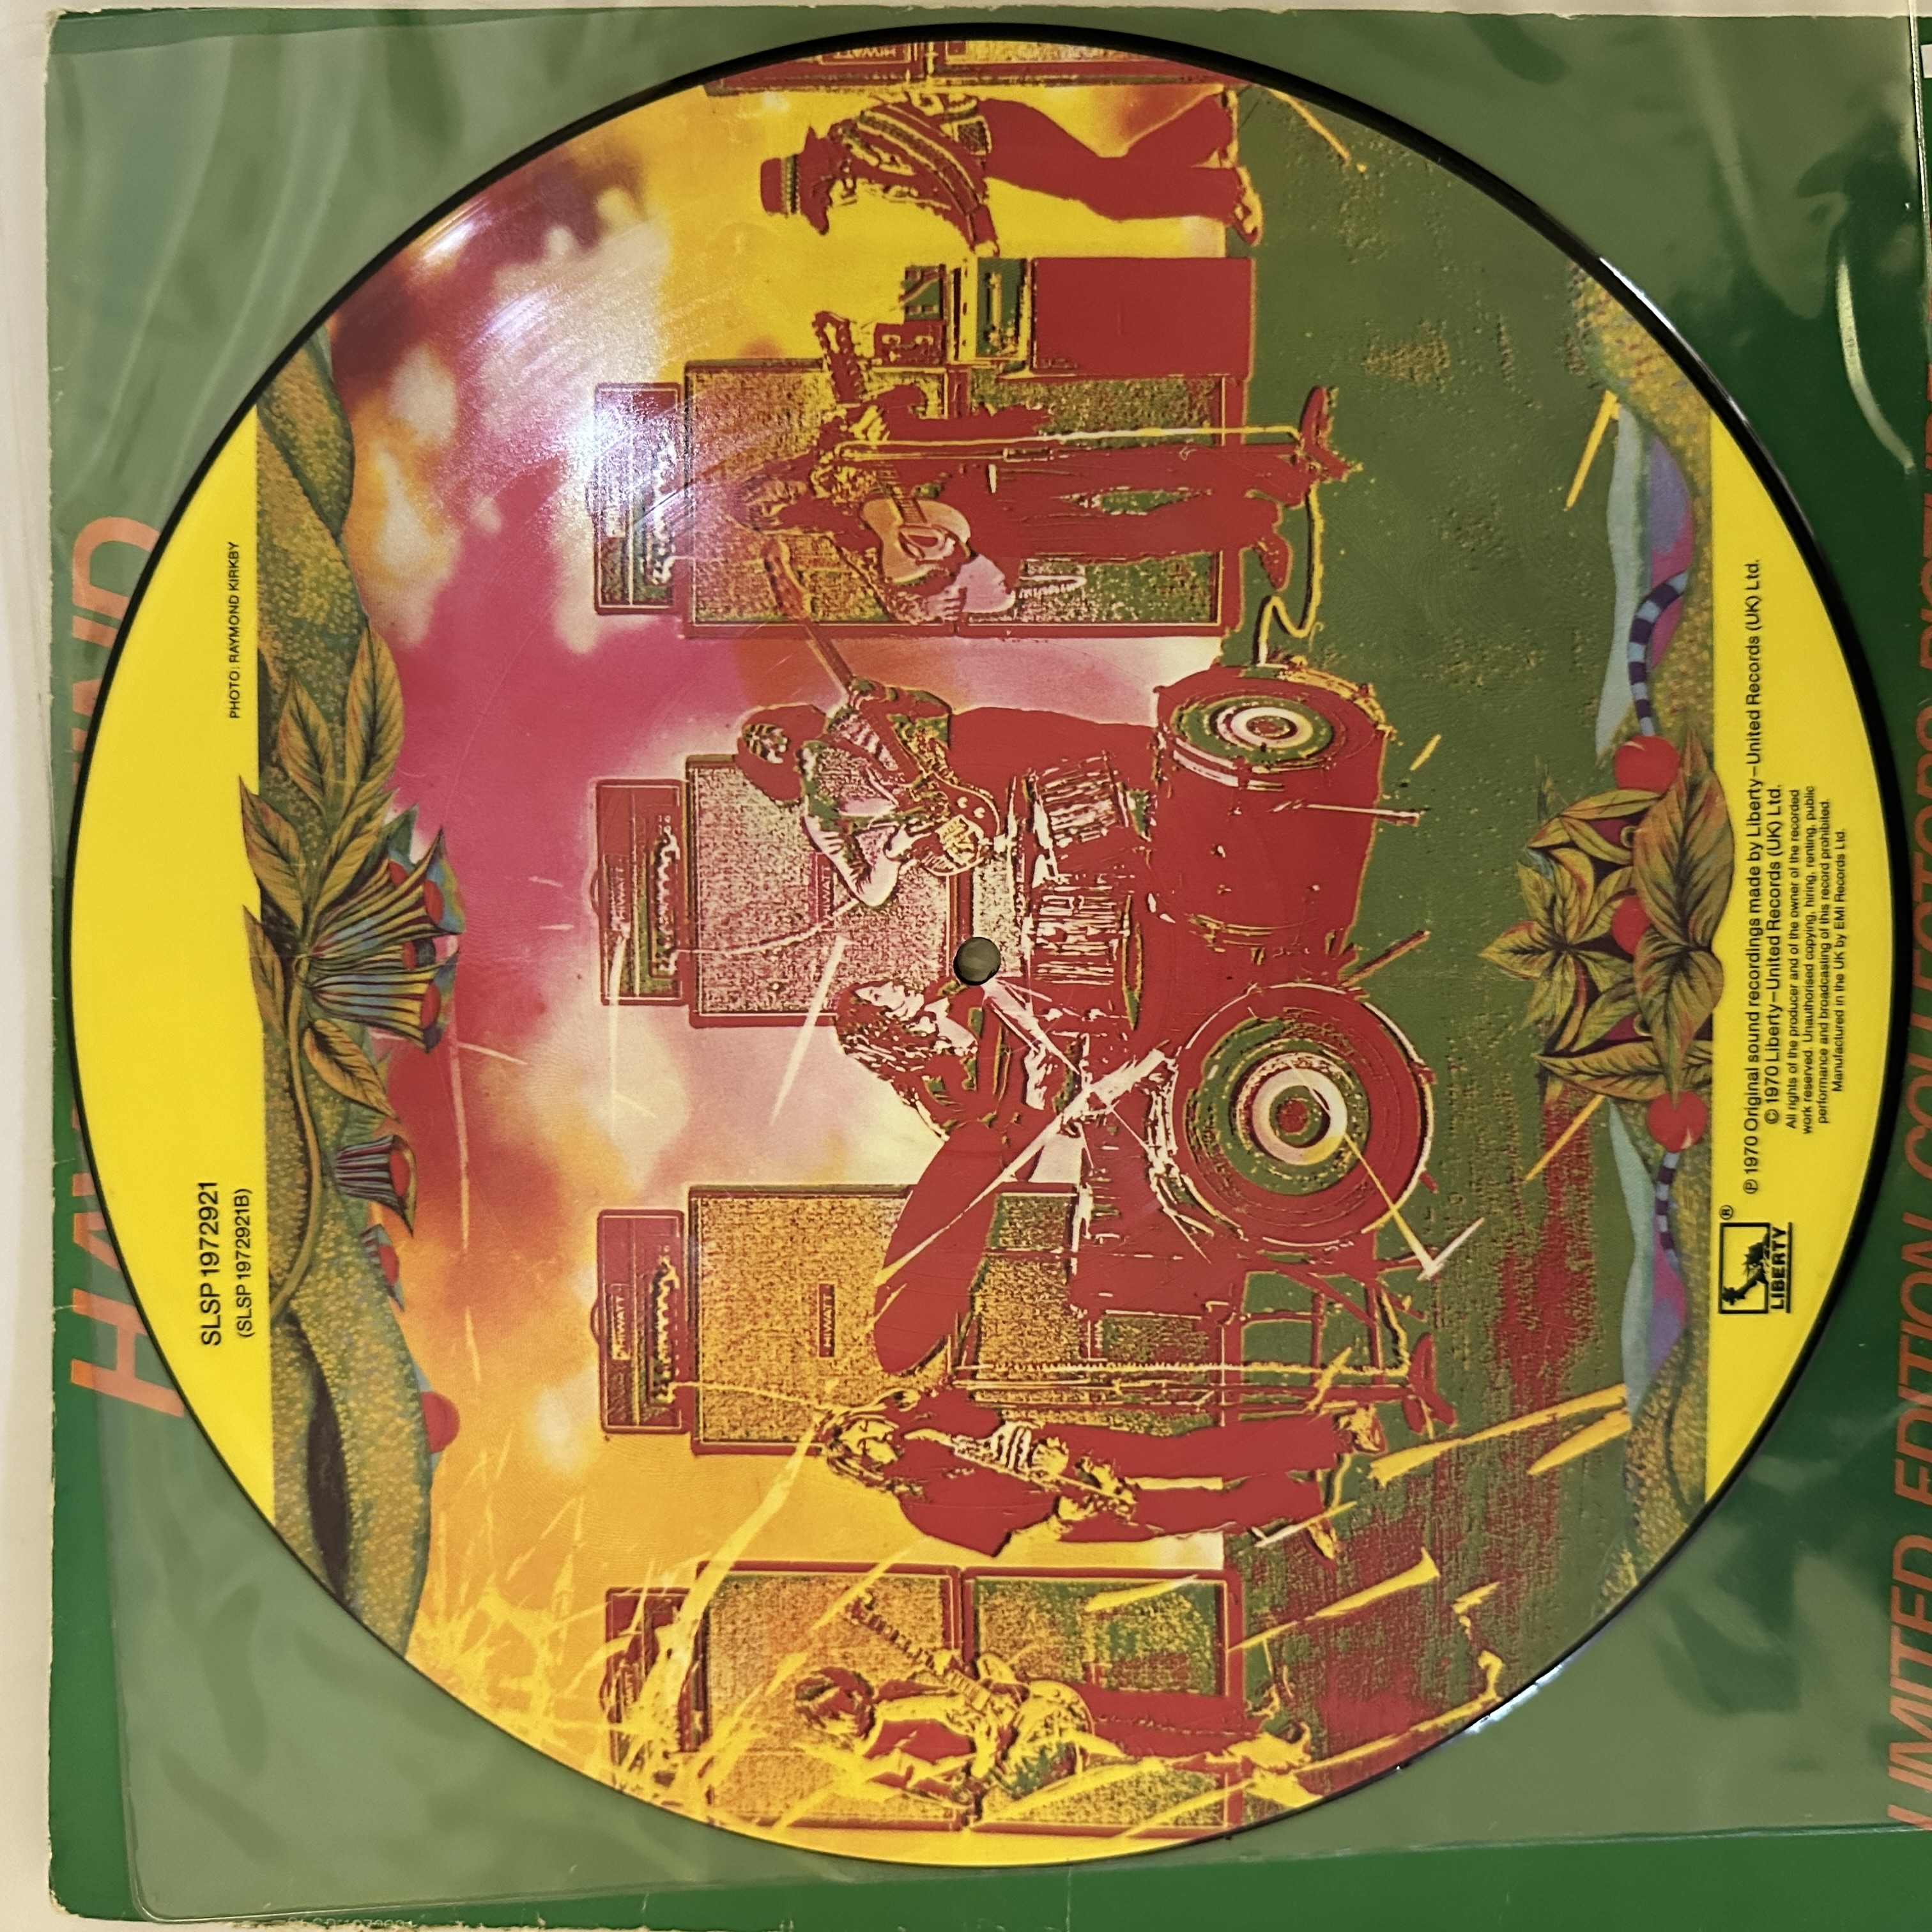 Hawkwind limited edition picture disc - Image 8 of 8